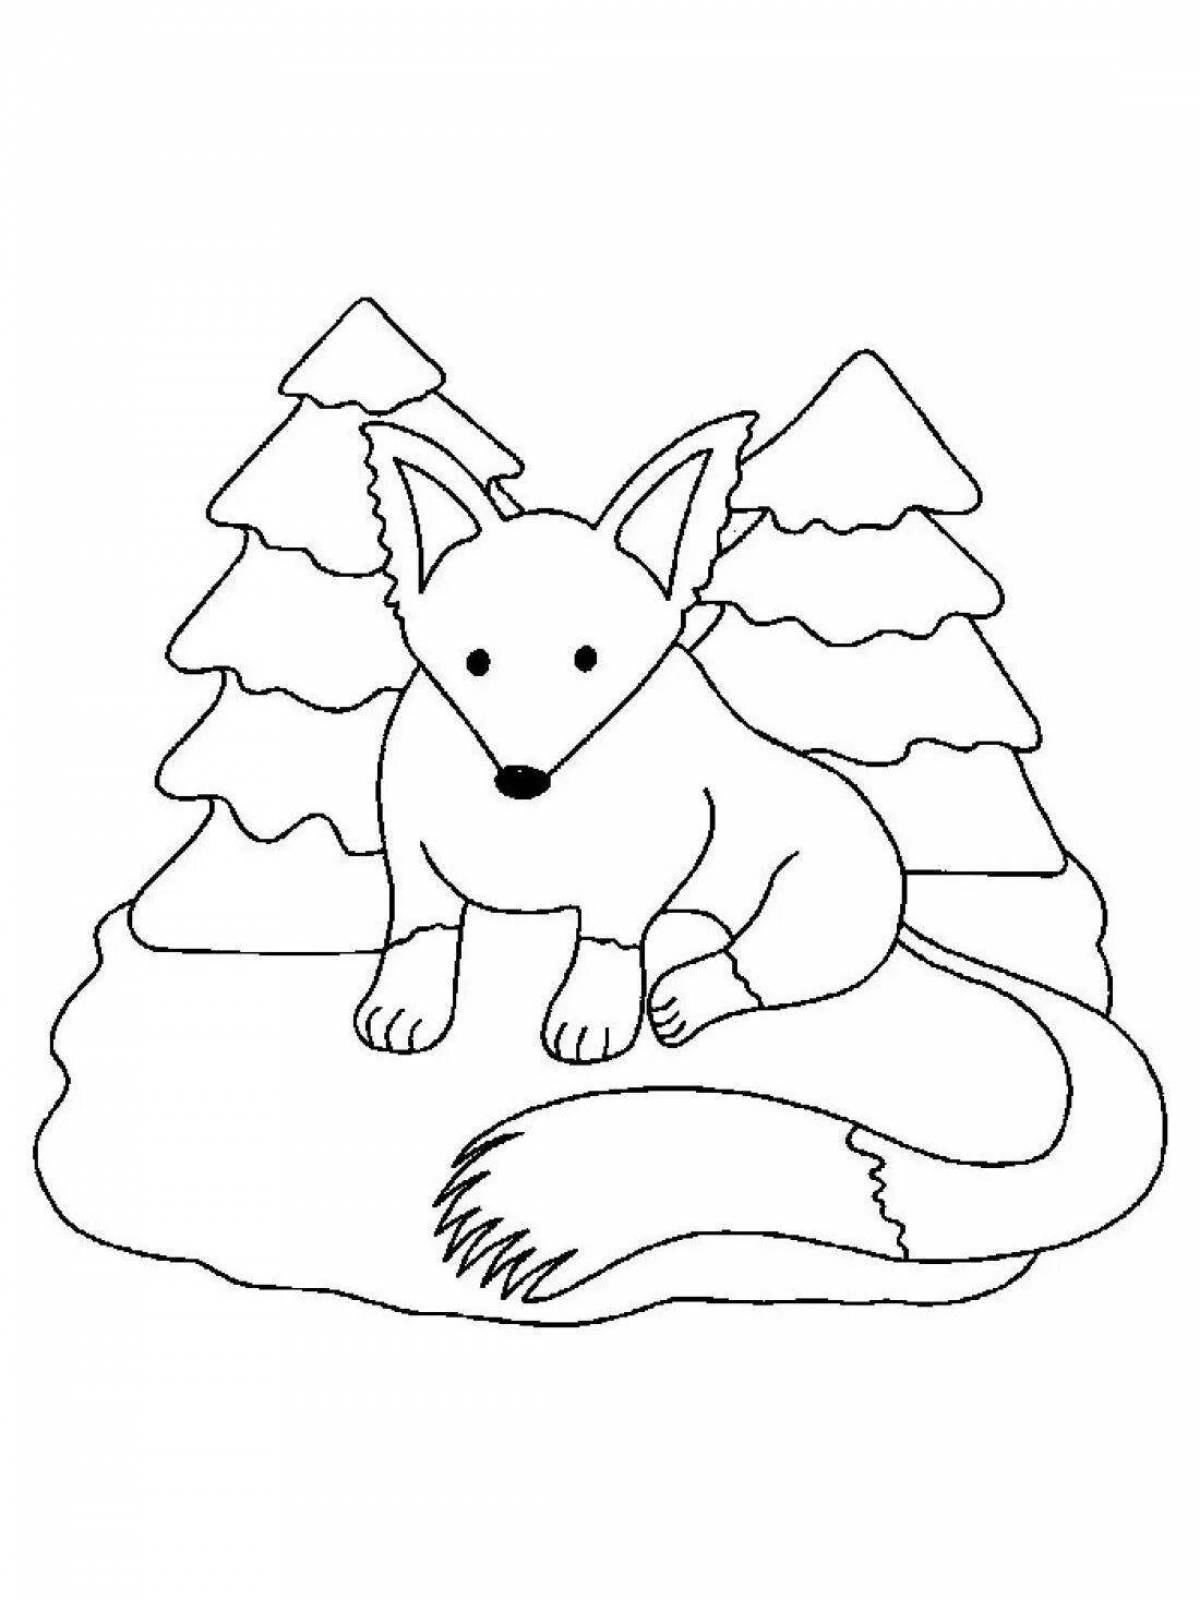 Coloring page wild winter forest with animals